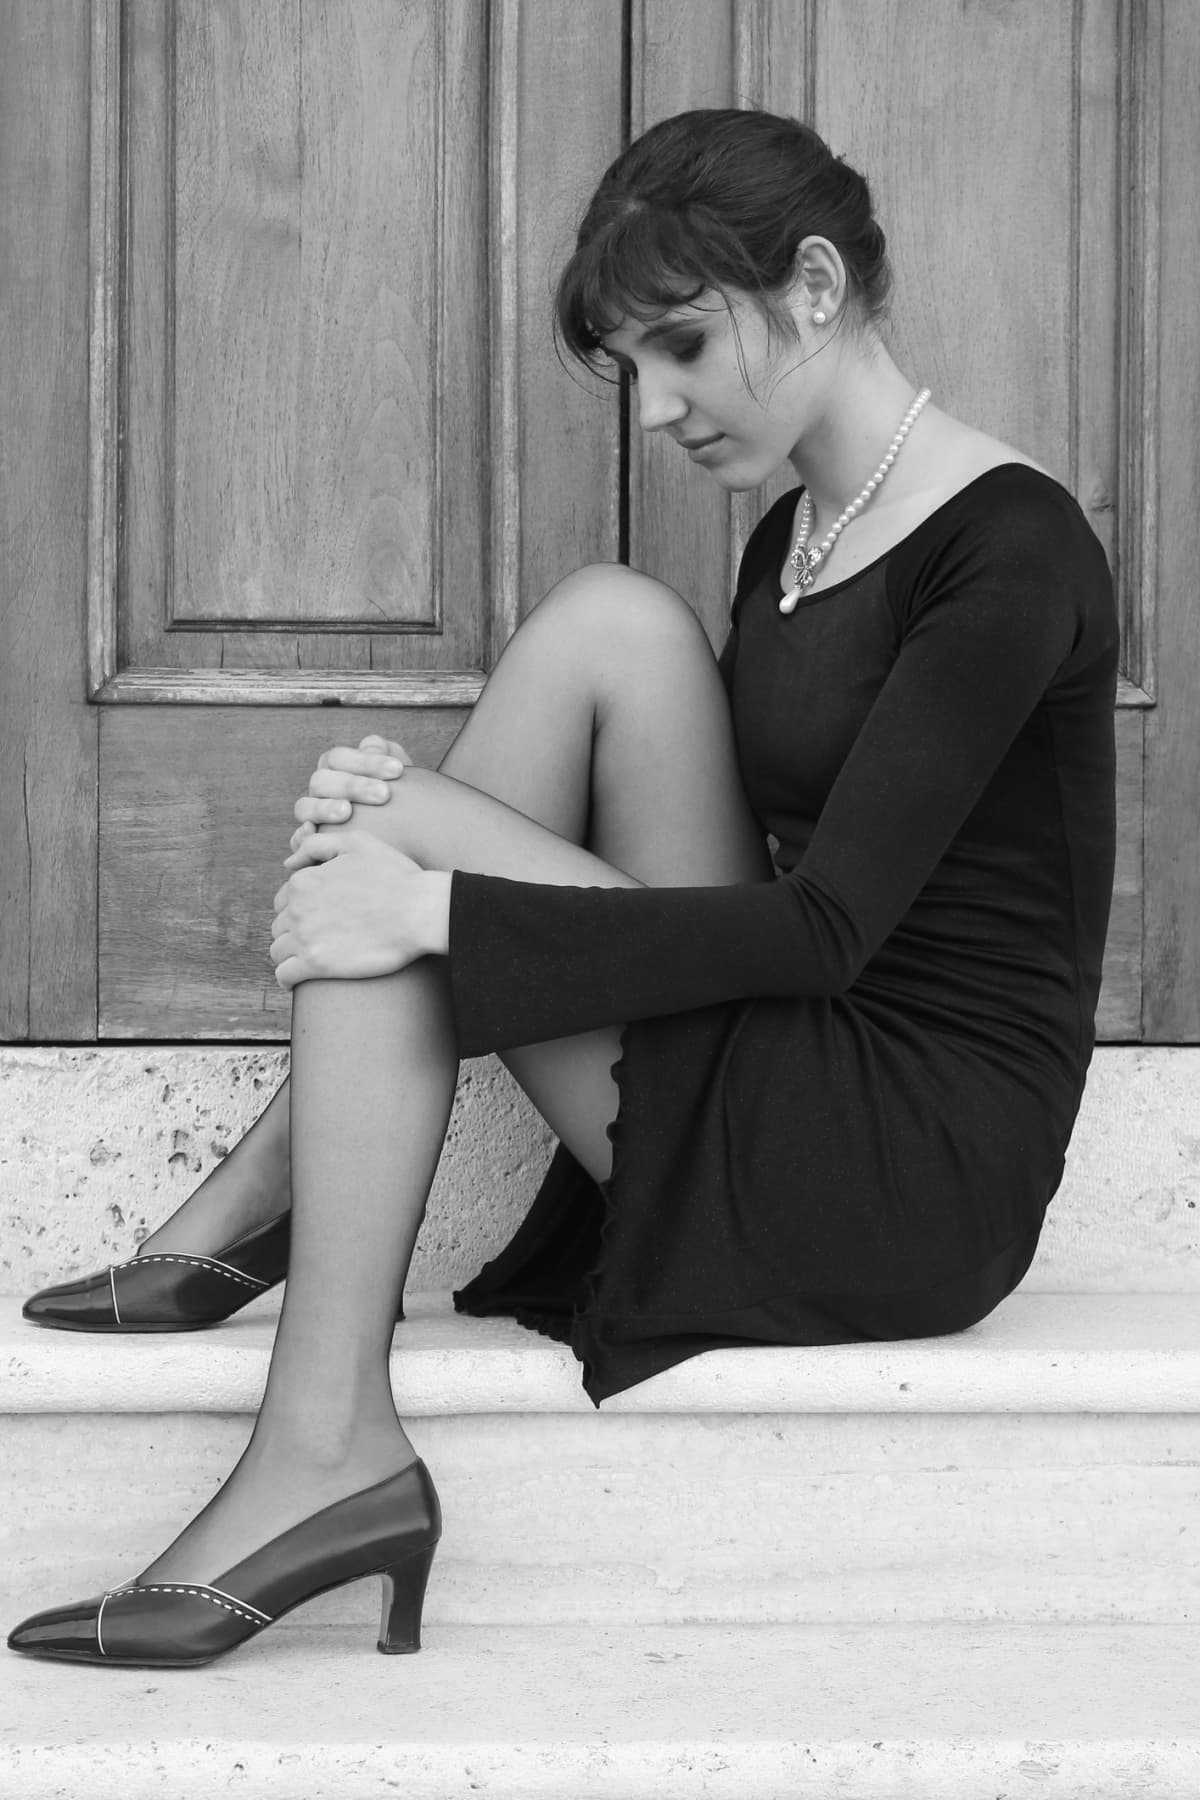 Black and white photo of woman in black dress and pantyhose sitting in front of door